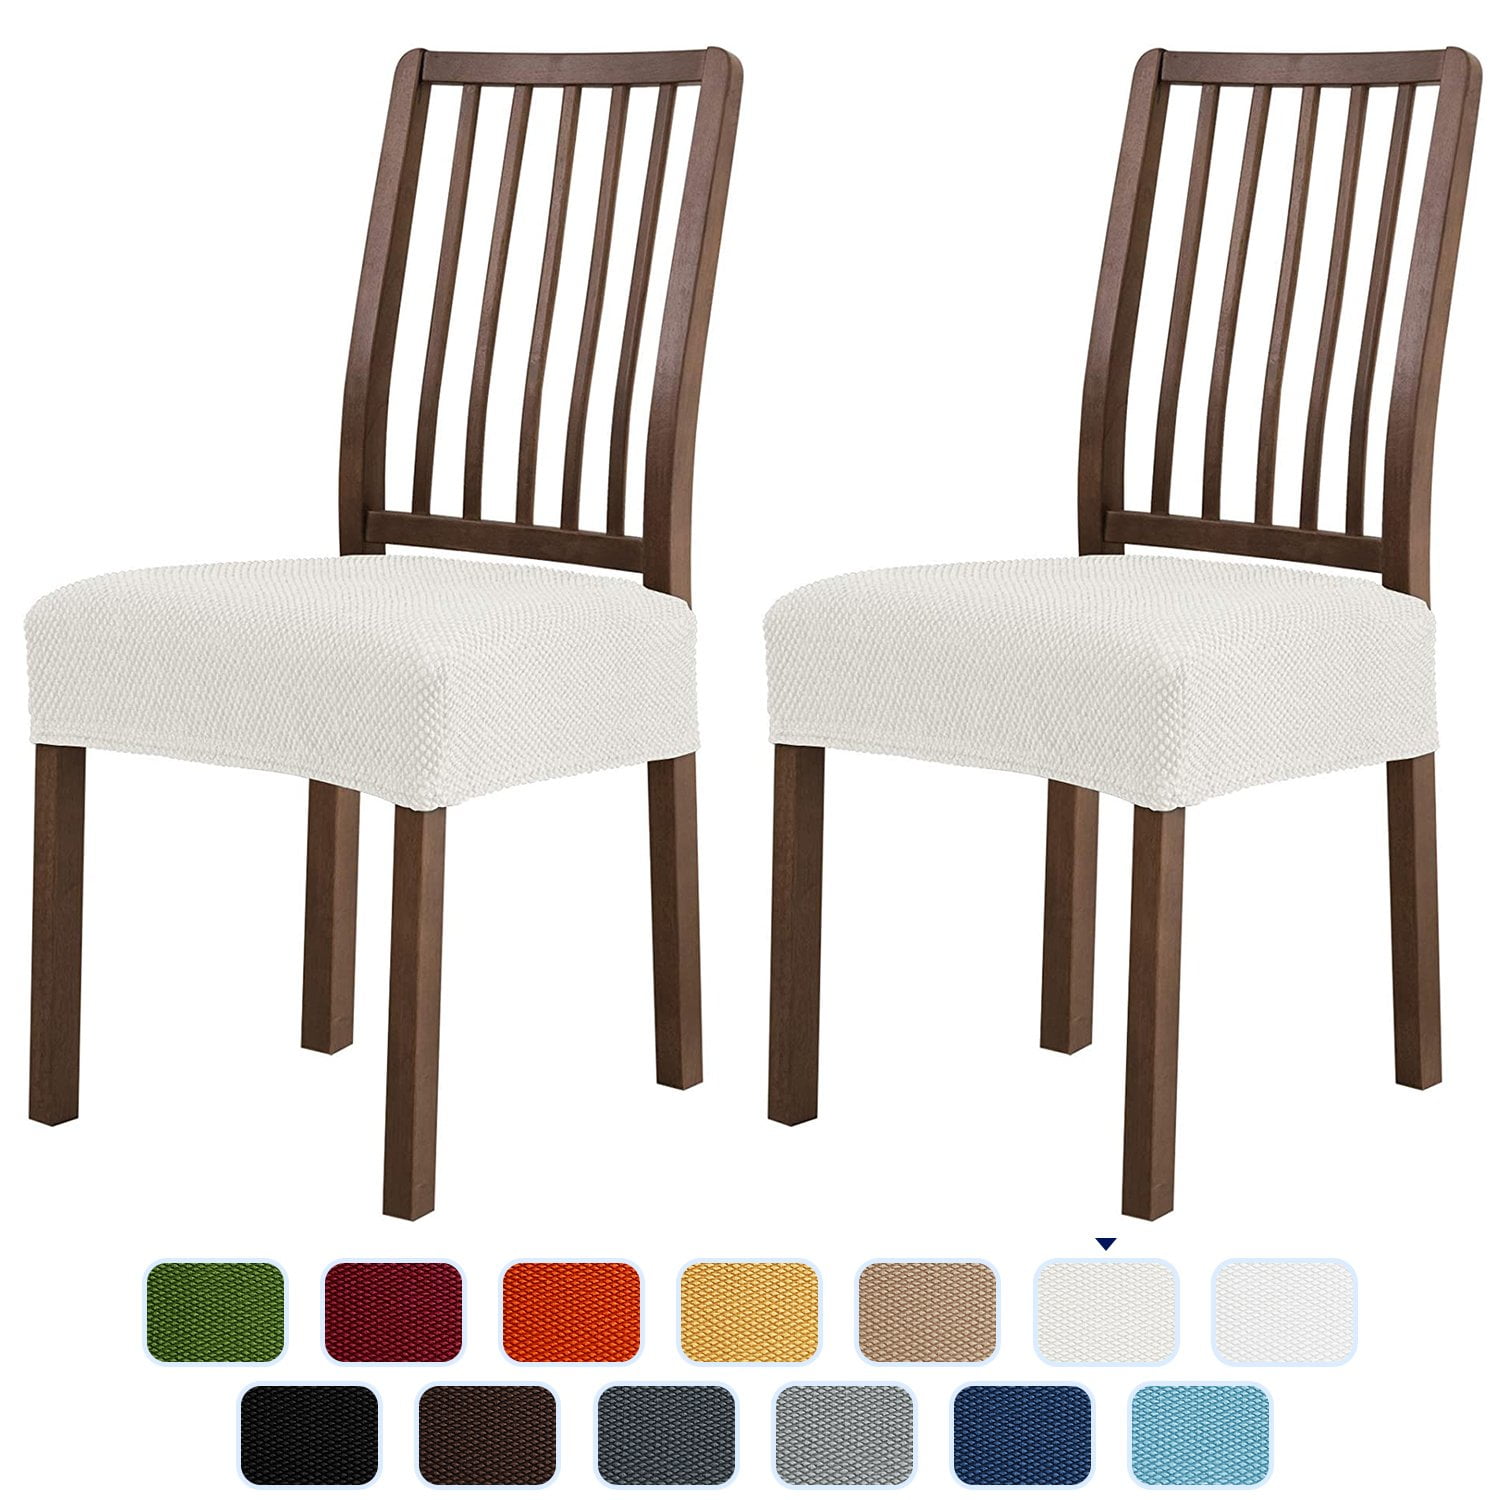 Stretch Dining Chair Covers Slipcovers Universal Chair Protective Covers New 23 